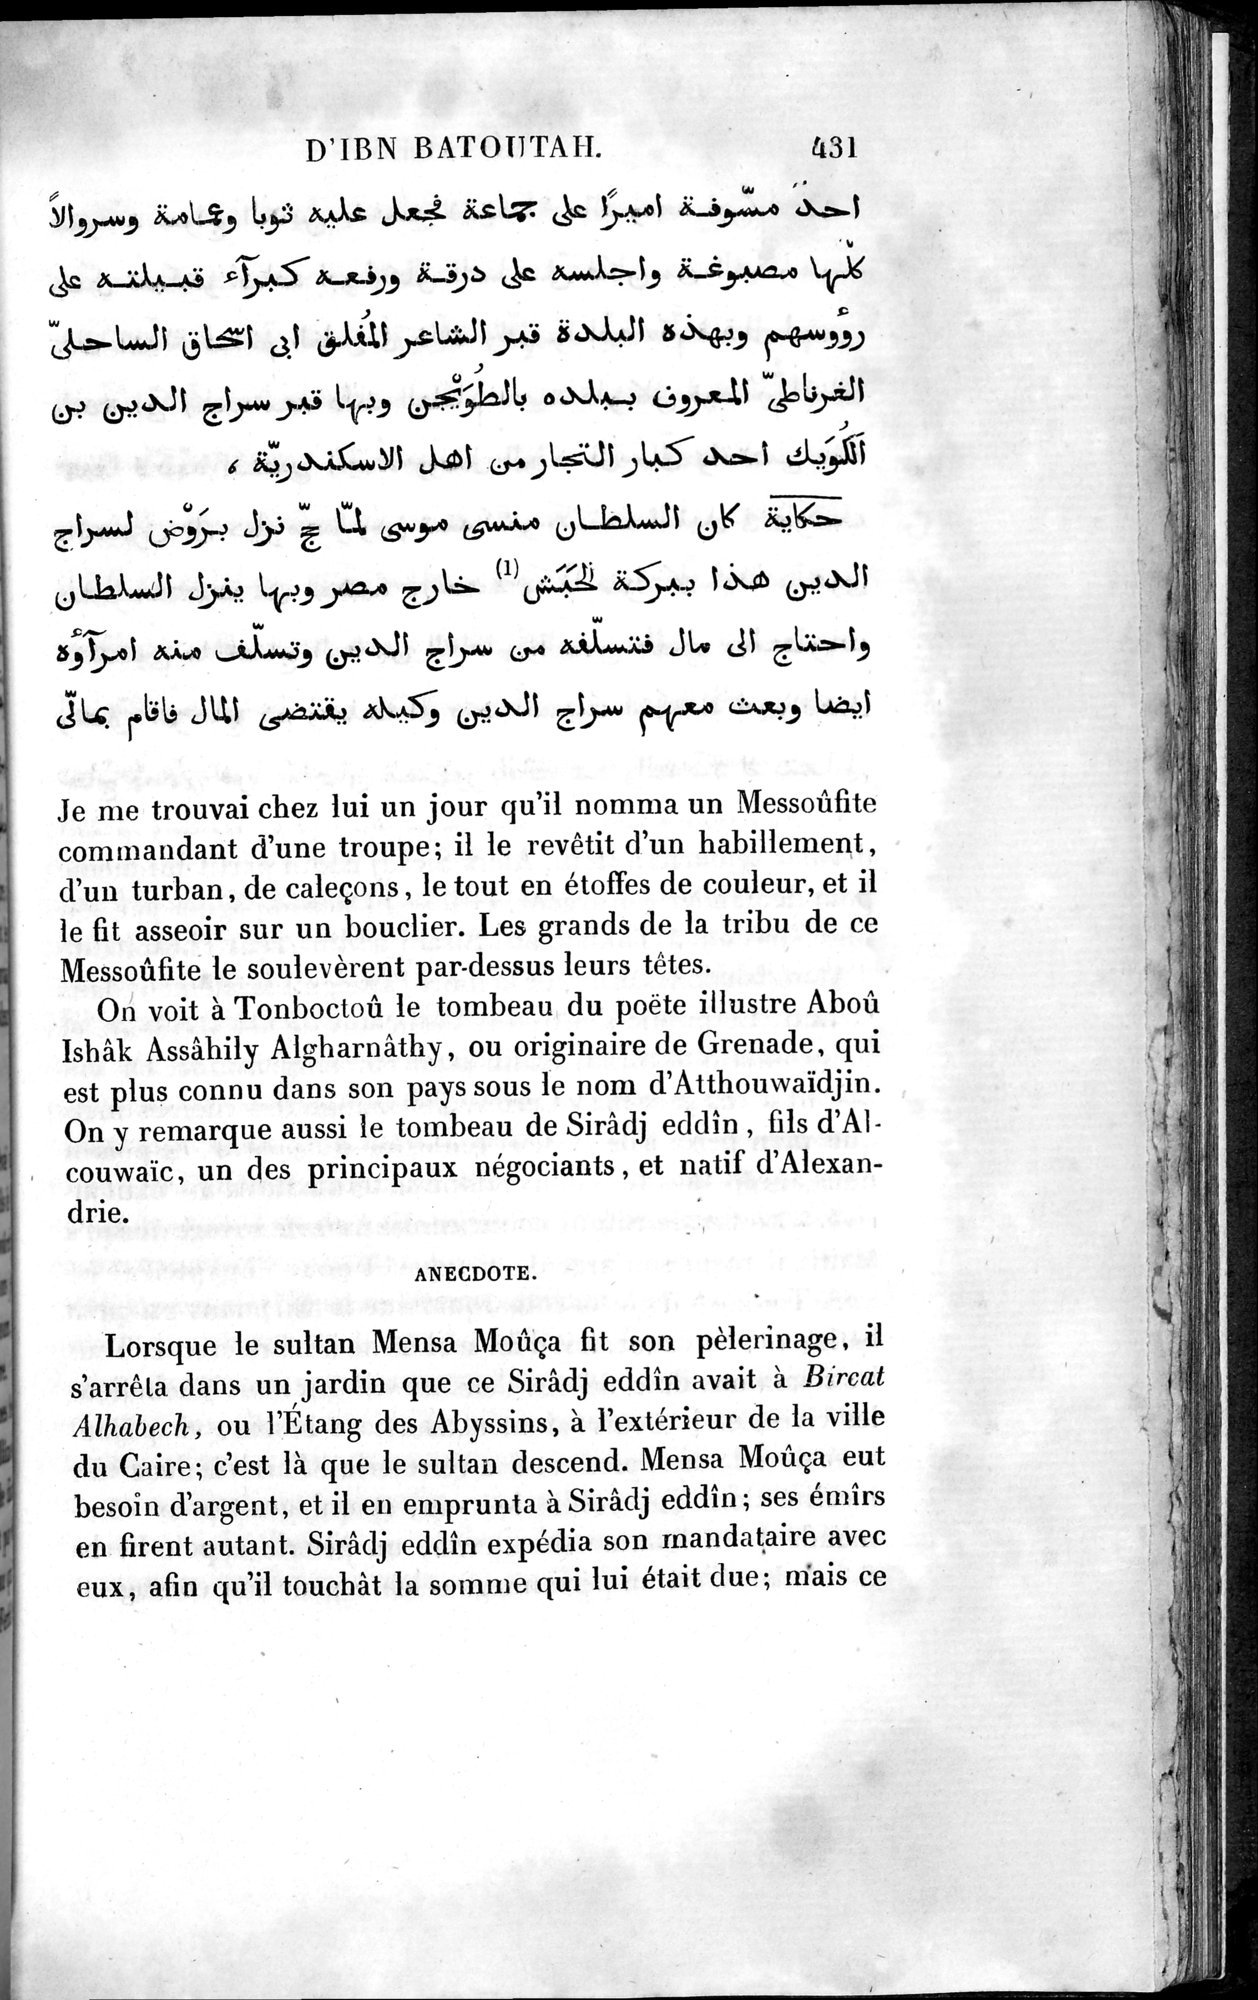 Voyages d'Ibn Batoutah : vol.4 / Page 443 (Grayscale High Resolution Image)